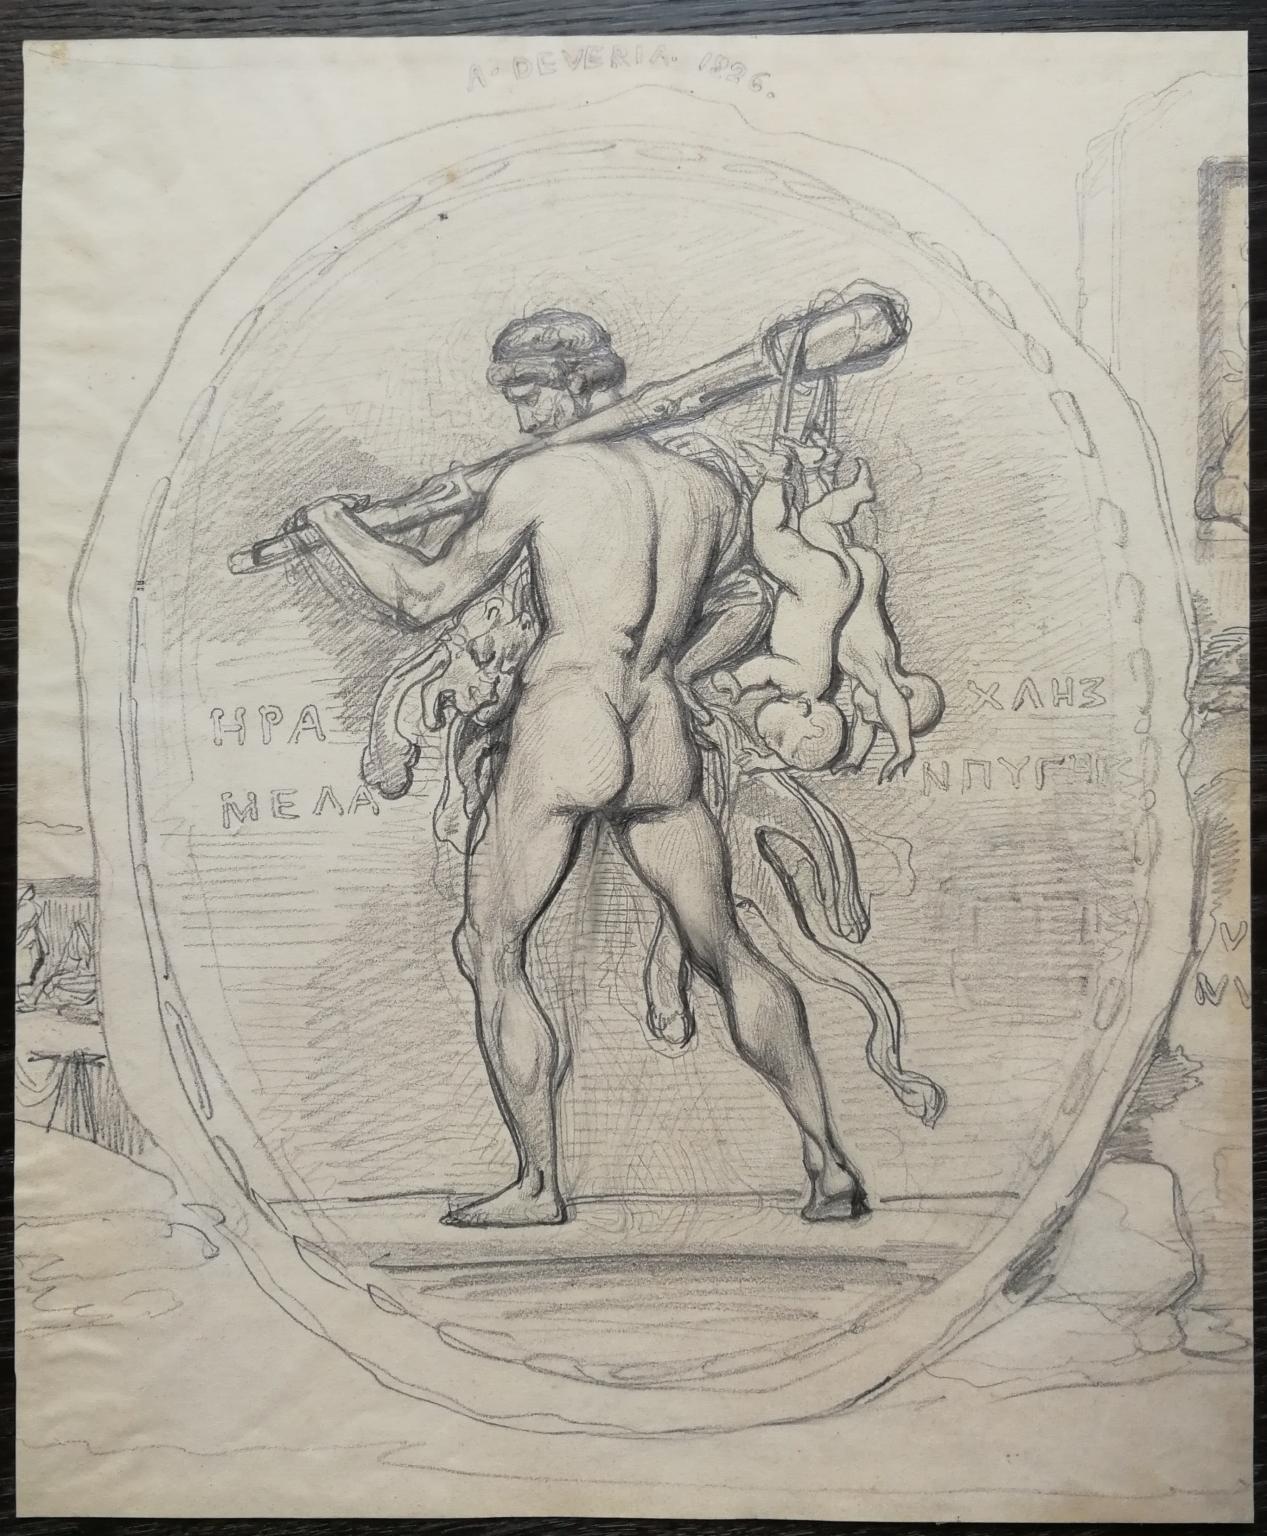 French Neoclassic mythological figurative drawing early 18th century - Art by Achille Devéria